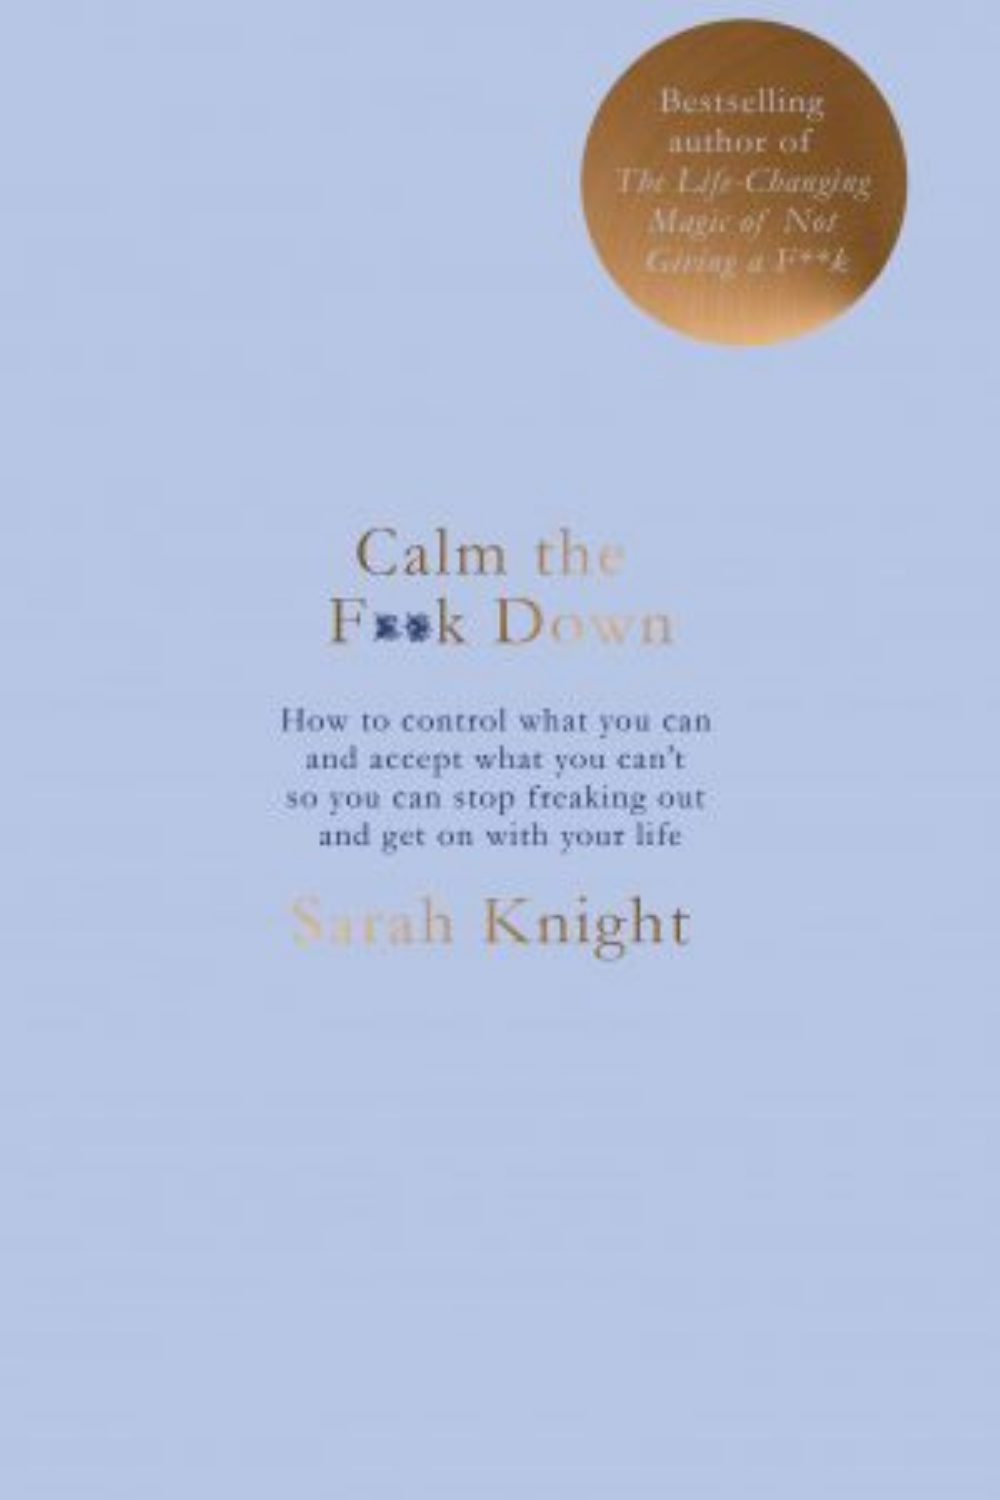 best self-help book - Calm the F**k Down: how to control what you can and accept what you can